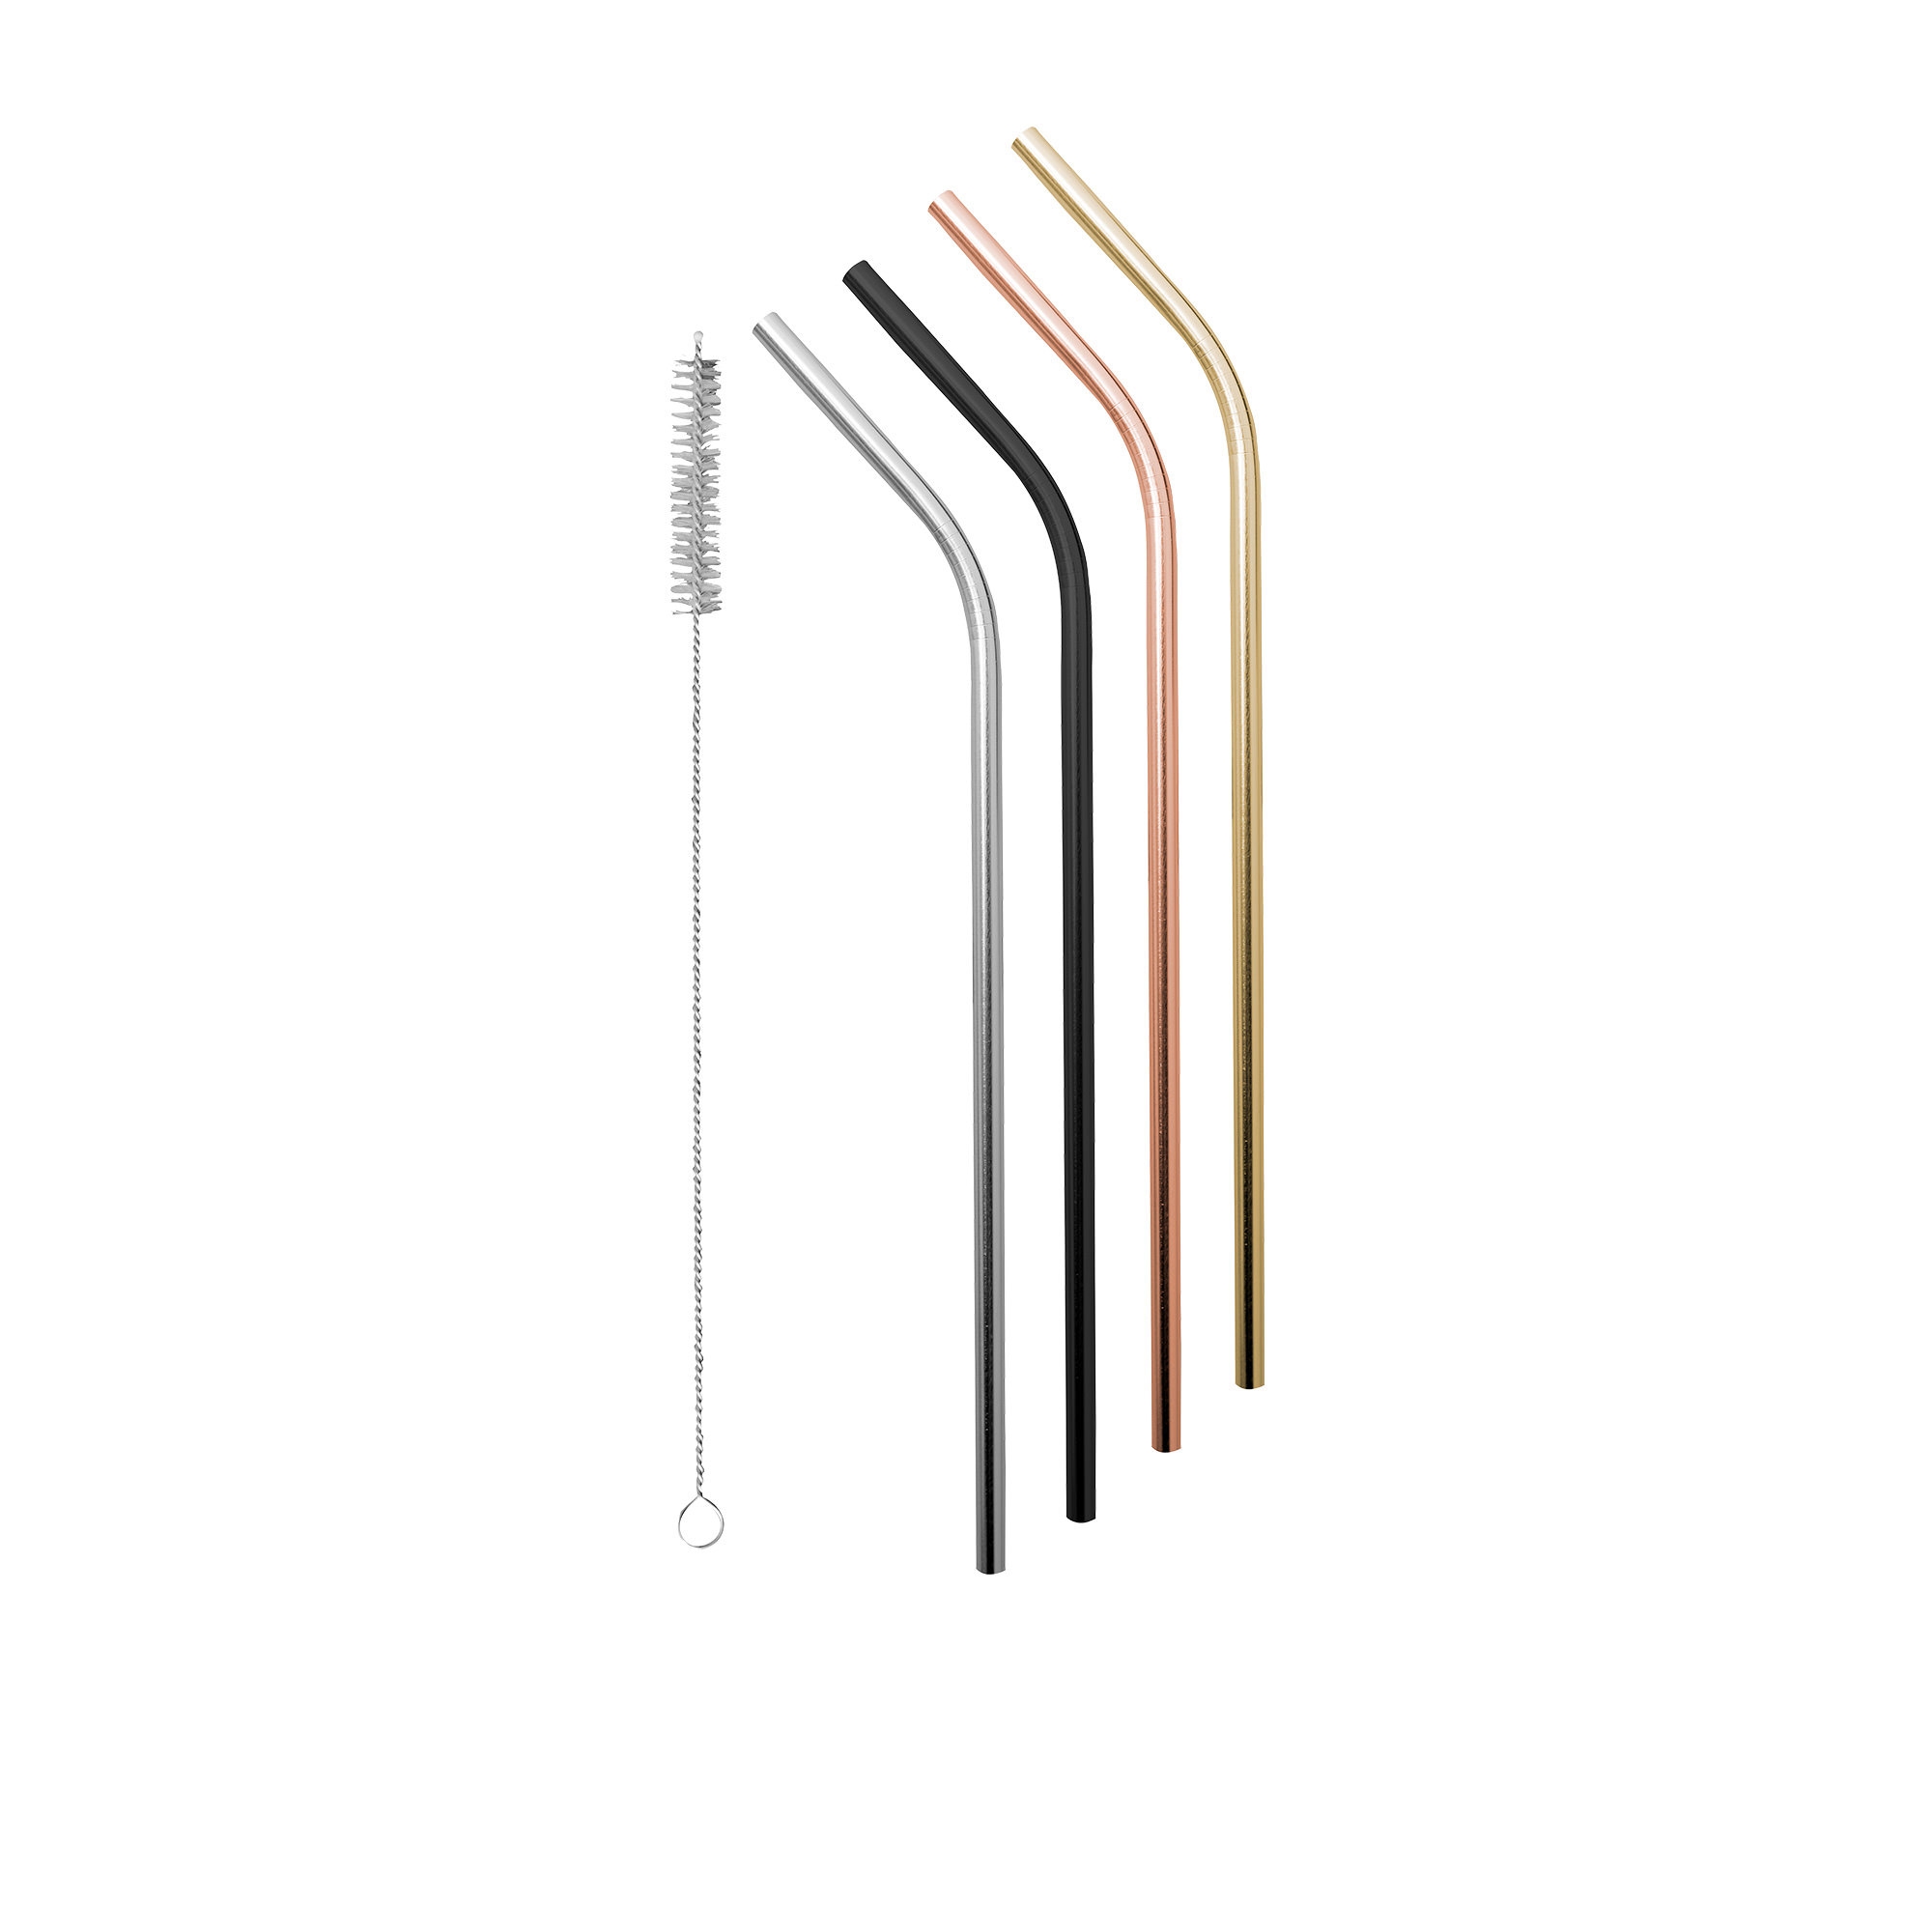 Avanti Stainless Steel Straw with Cleaning Brush Set of 4 Precious Metals Image 1